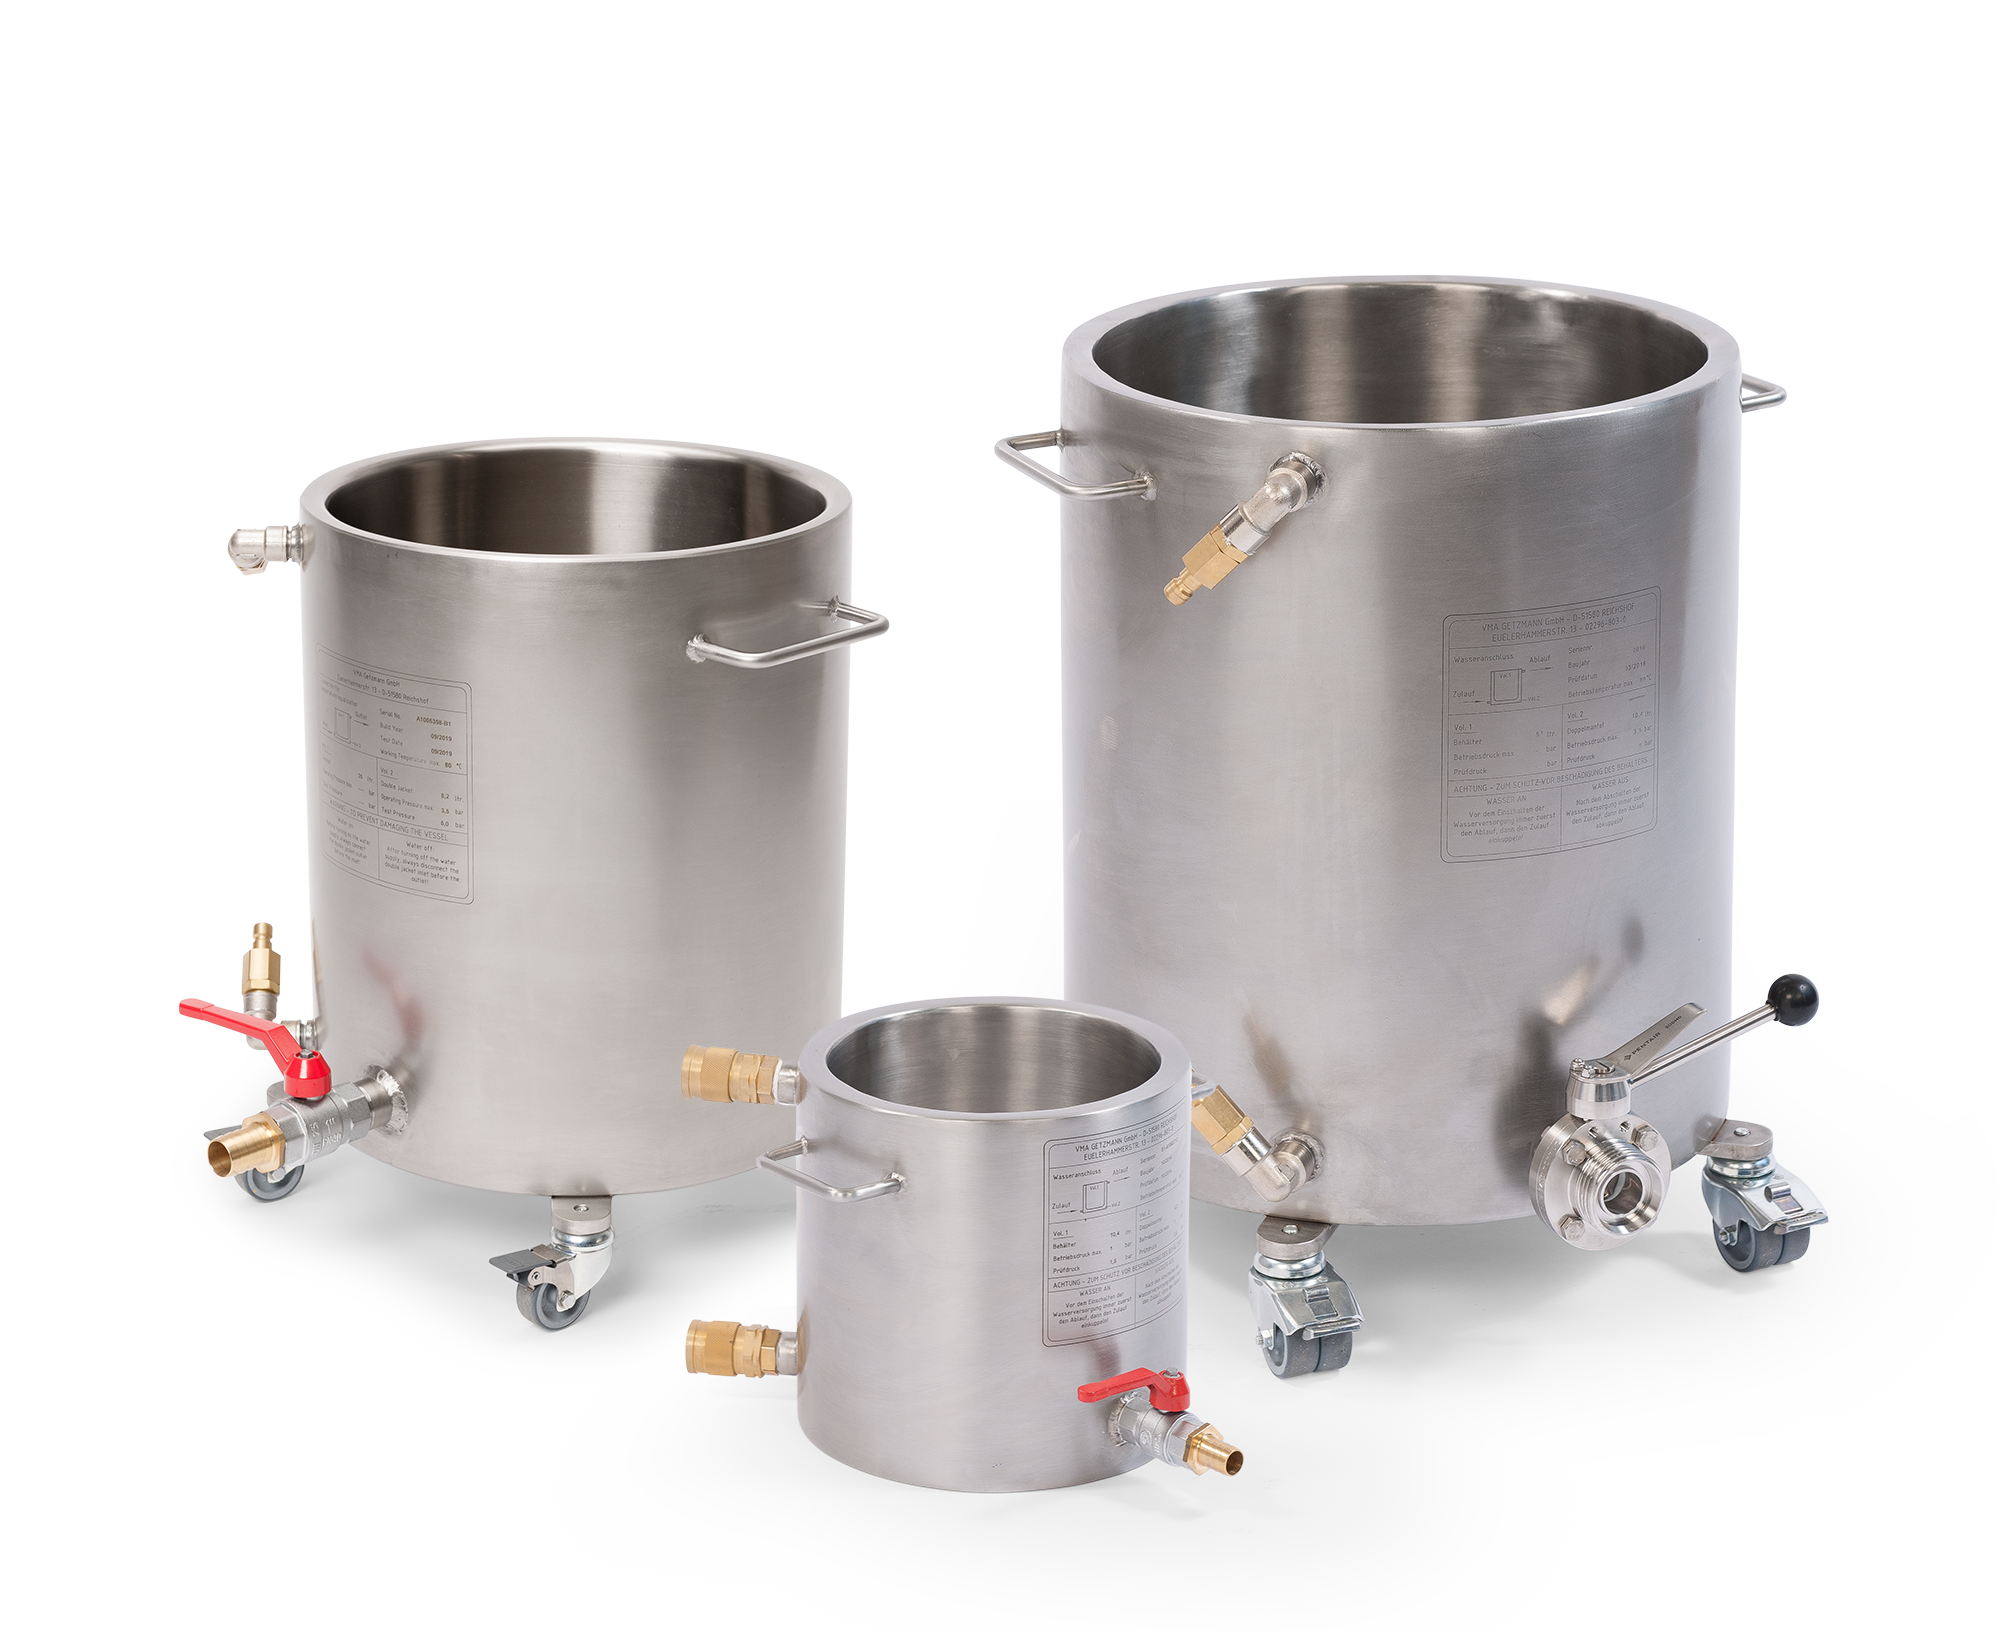 https://www.vma-getzmann.com/fileadmin/user_upload/accessories/containers/double-walled-containers_03_10-50-litres/dispersion-containers_10-50-litres_05.png